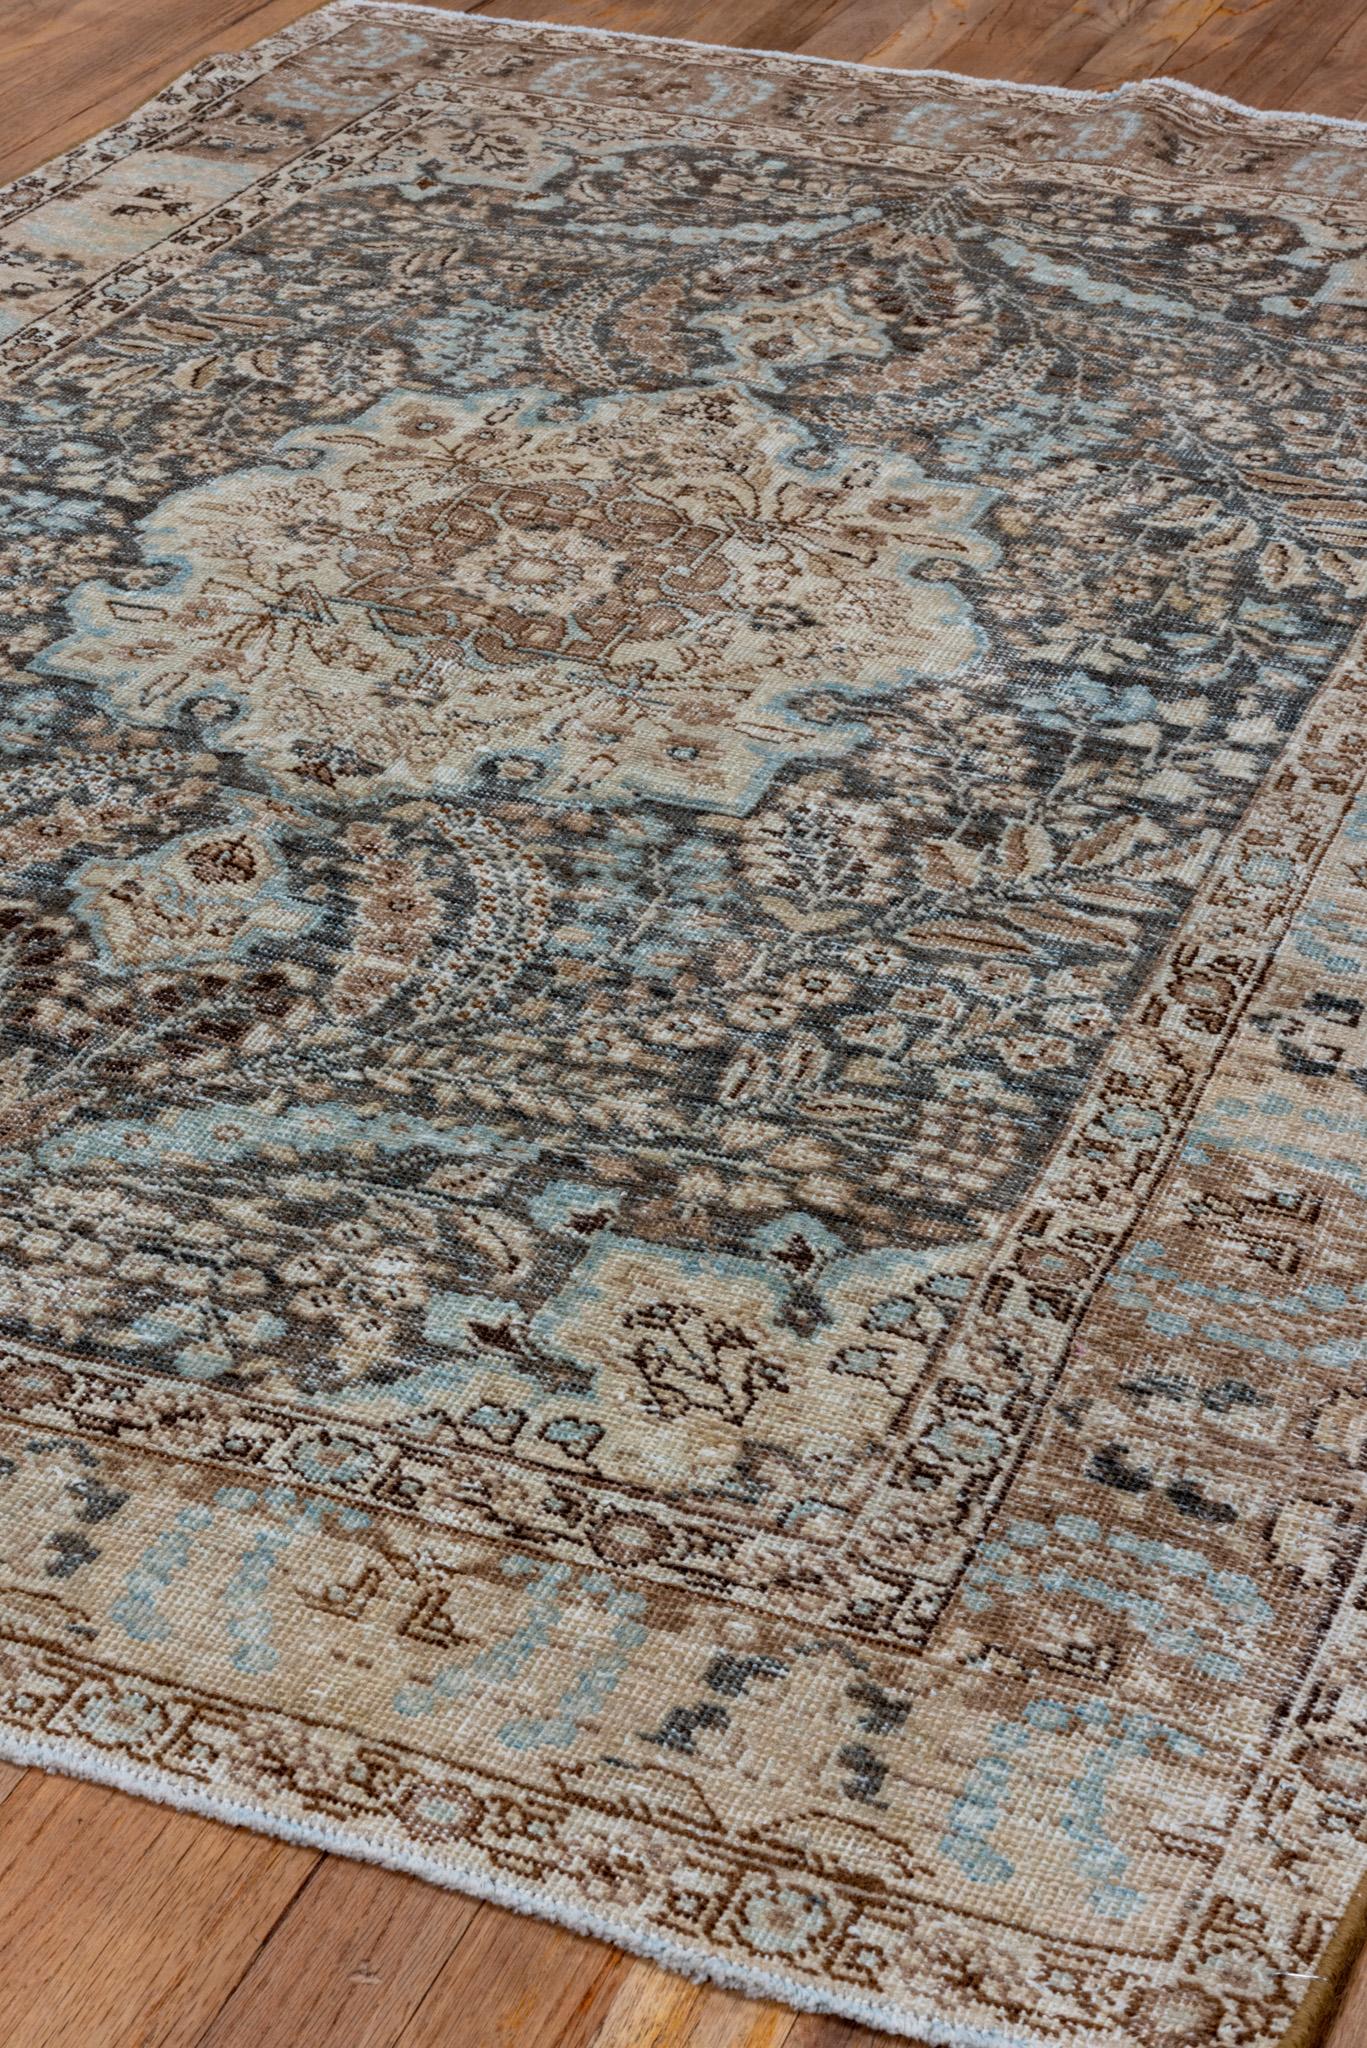 A Tabriz Rug circa 1930. Hand Knotted and made of 100% wool yarn.